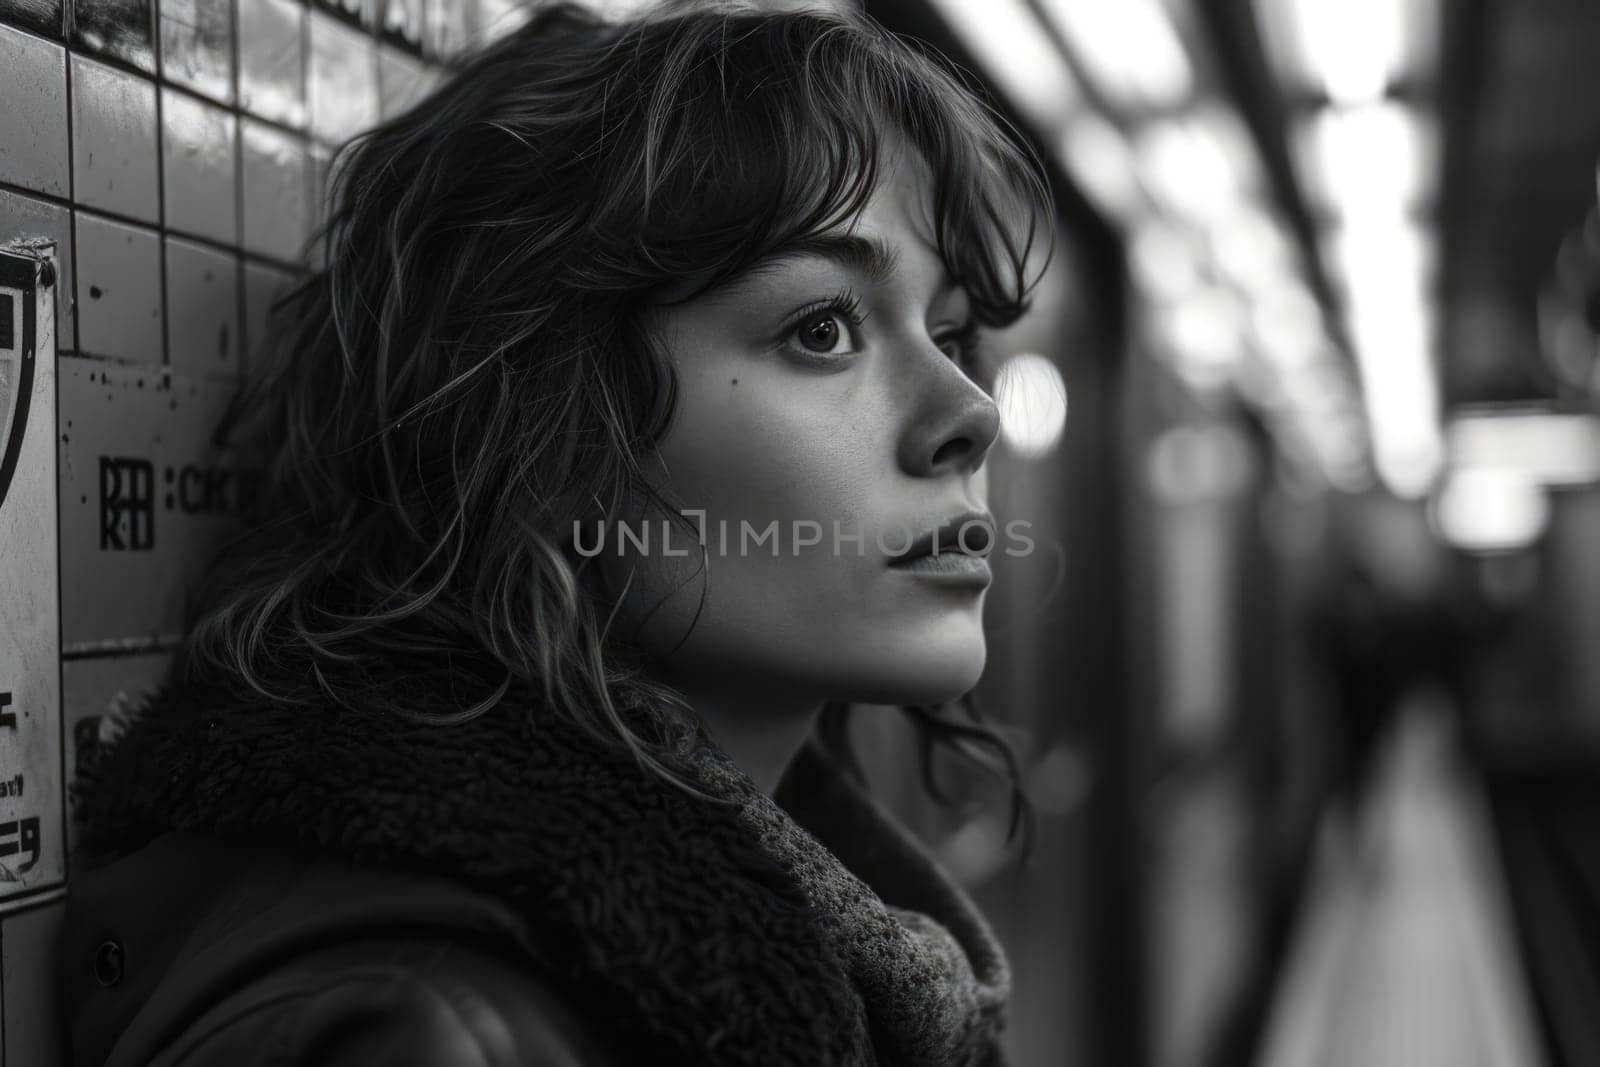 Black and White Portrait of a Girl in the Subway by Yurich32